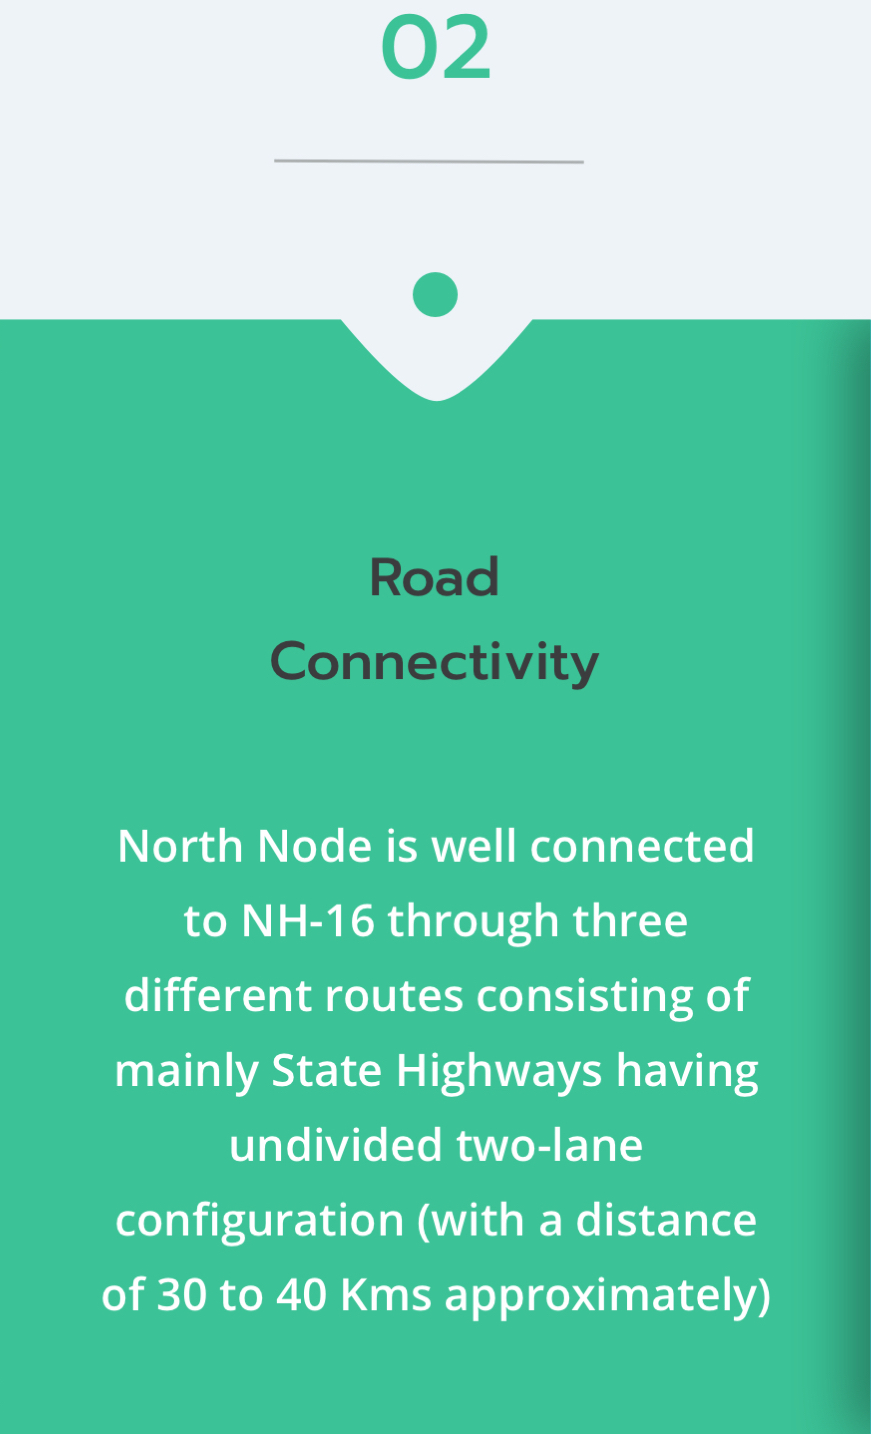 Road Connectivity